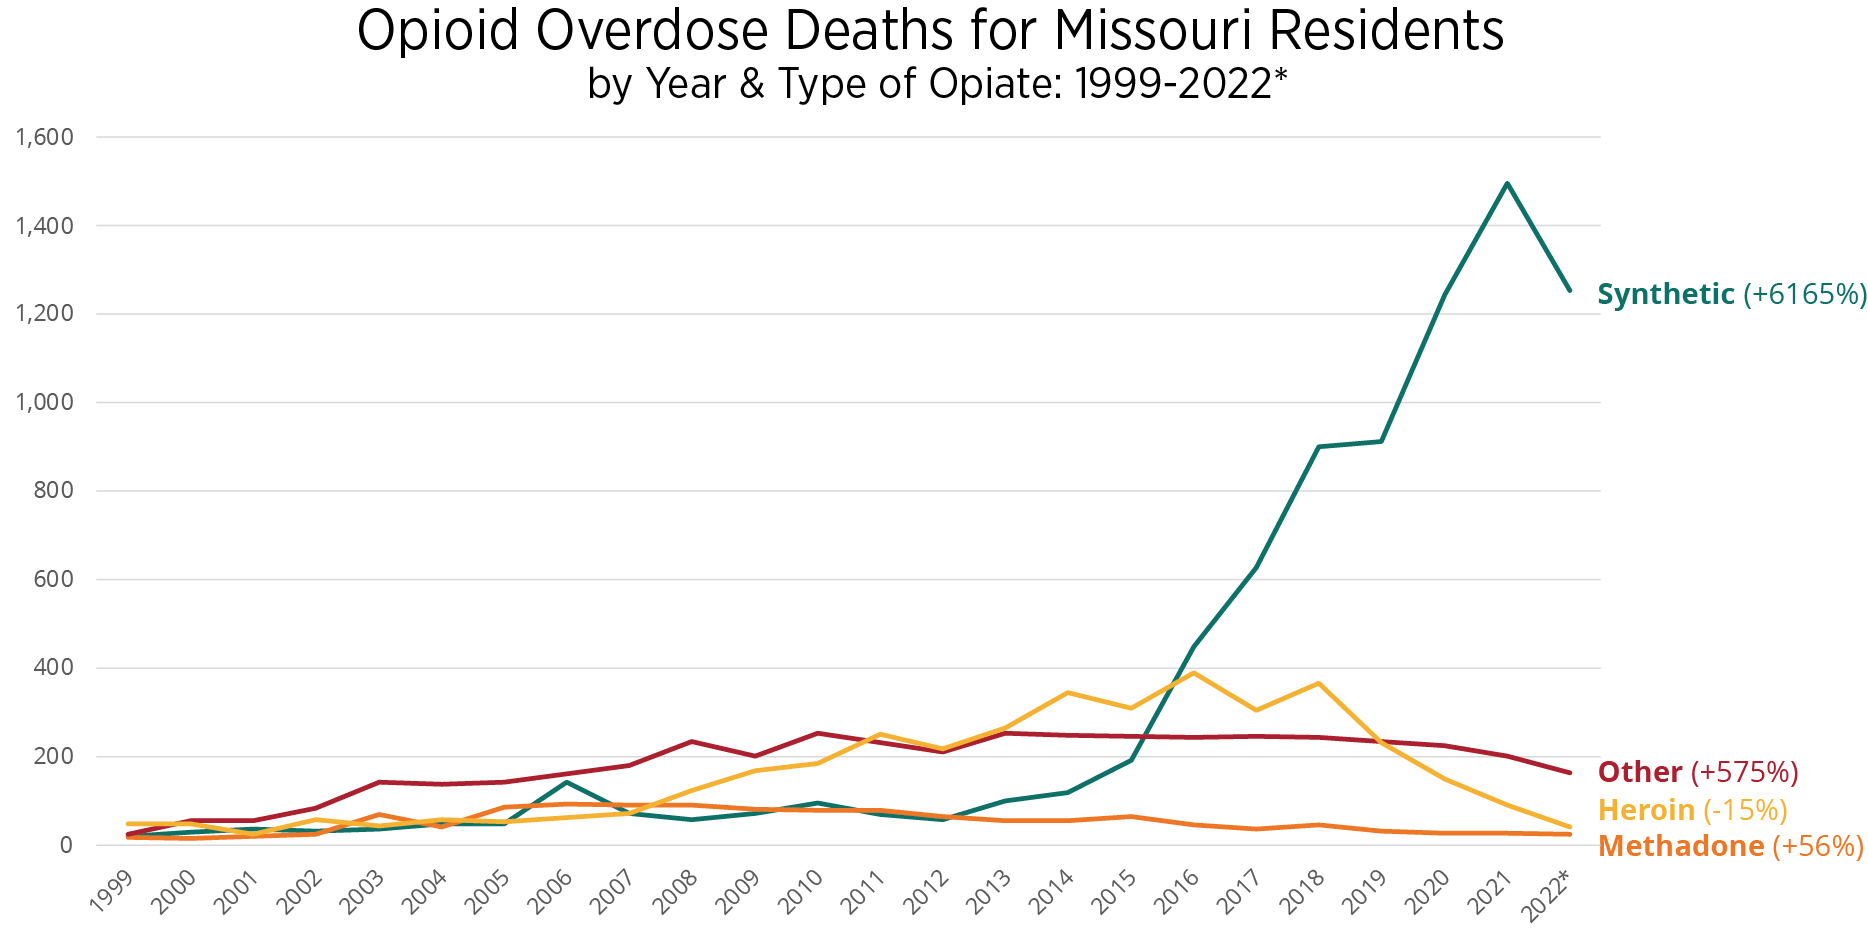 Opioid overdose deaths for Missouri residents by year and type of opiate